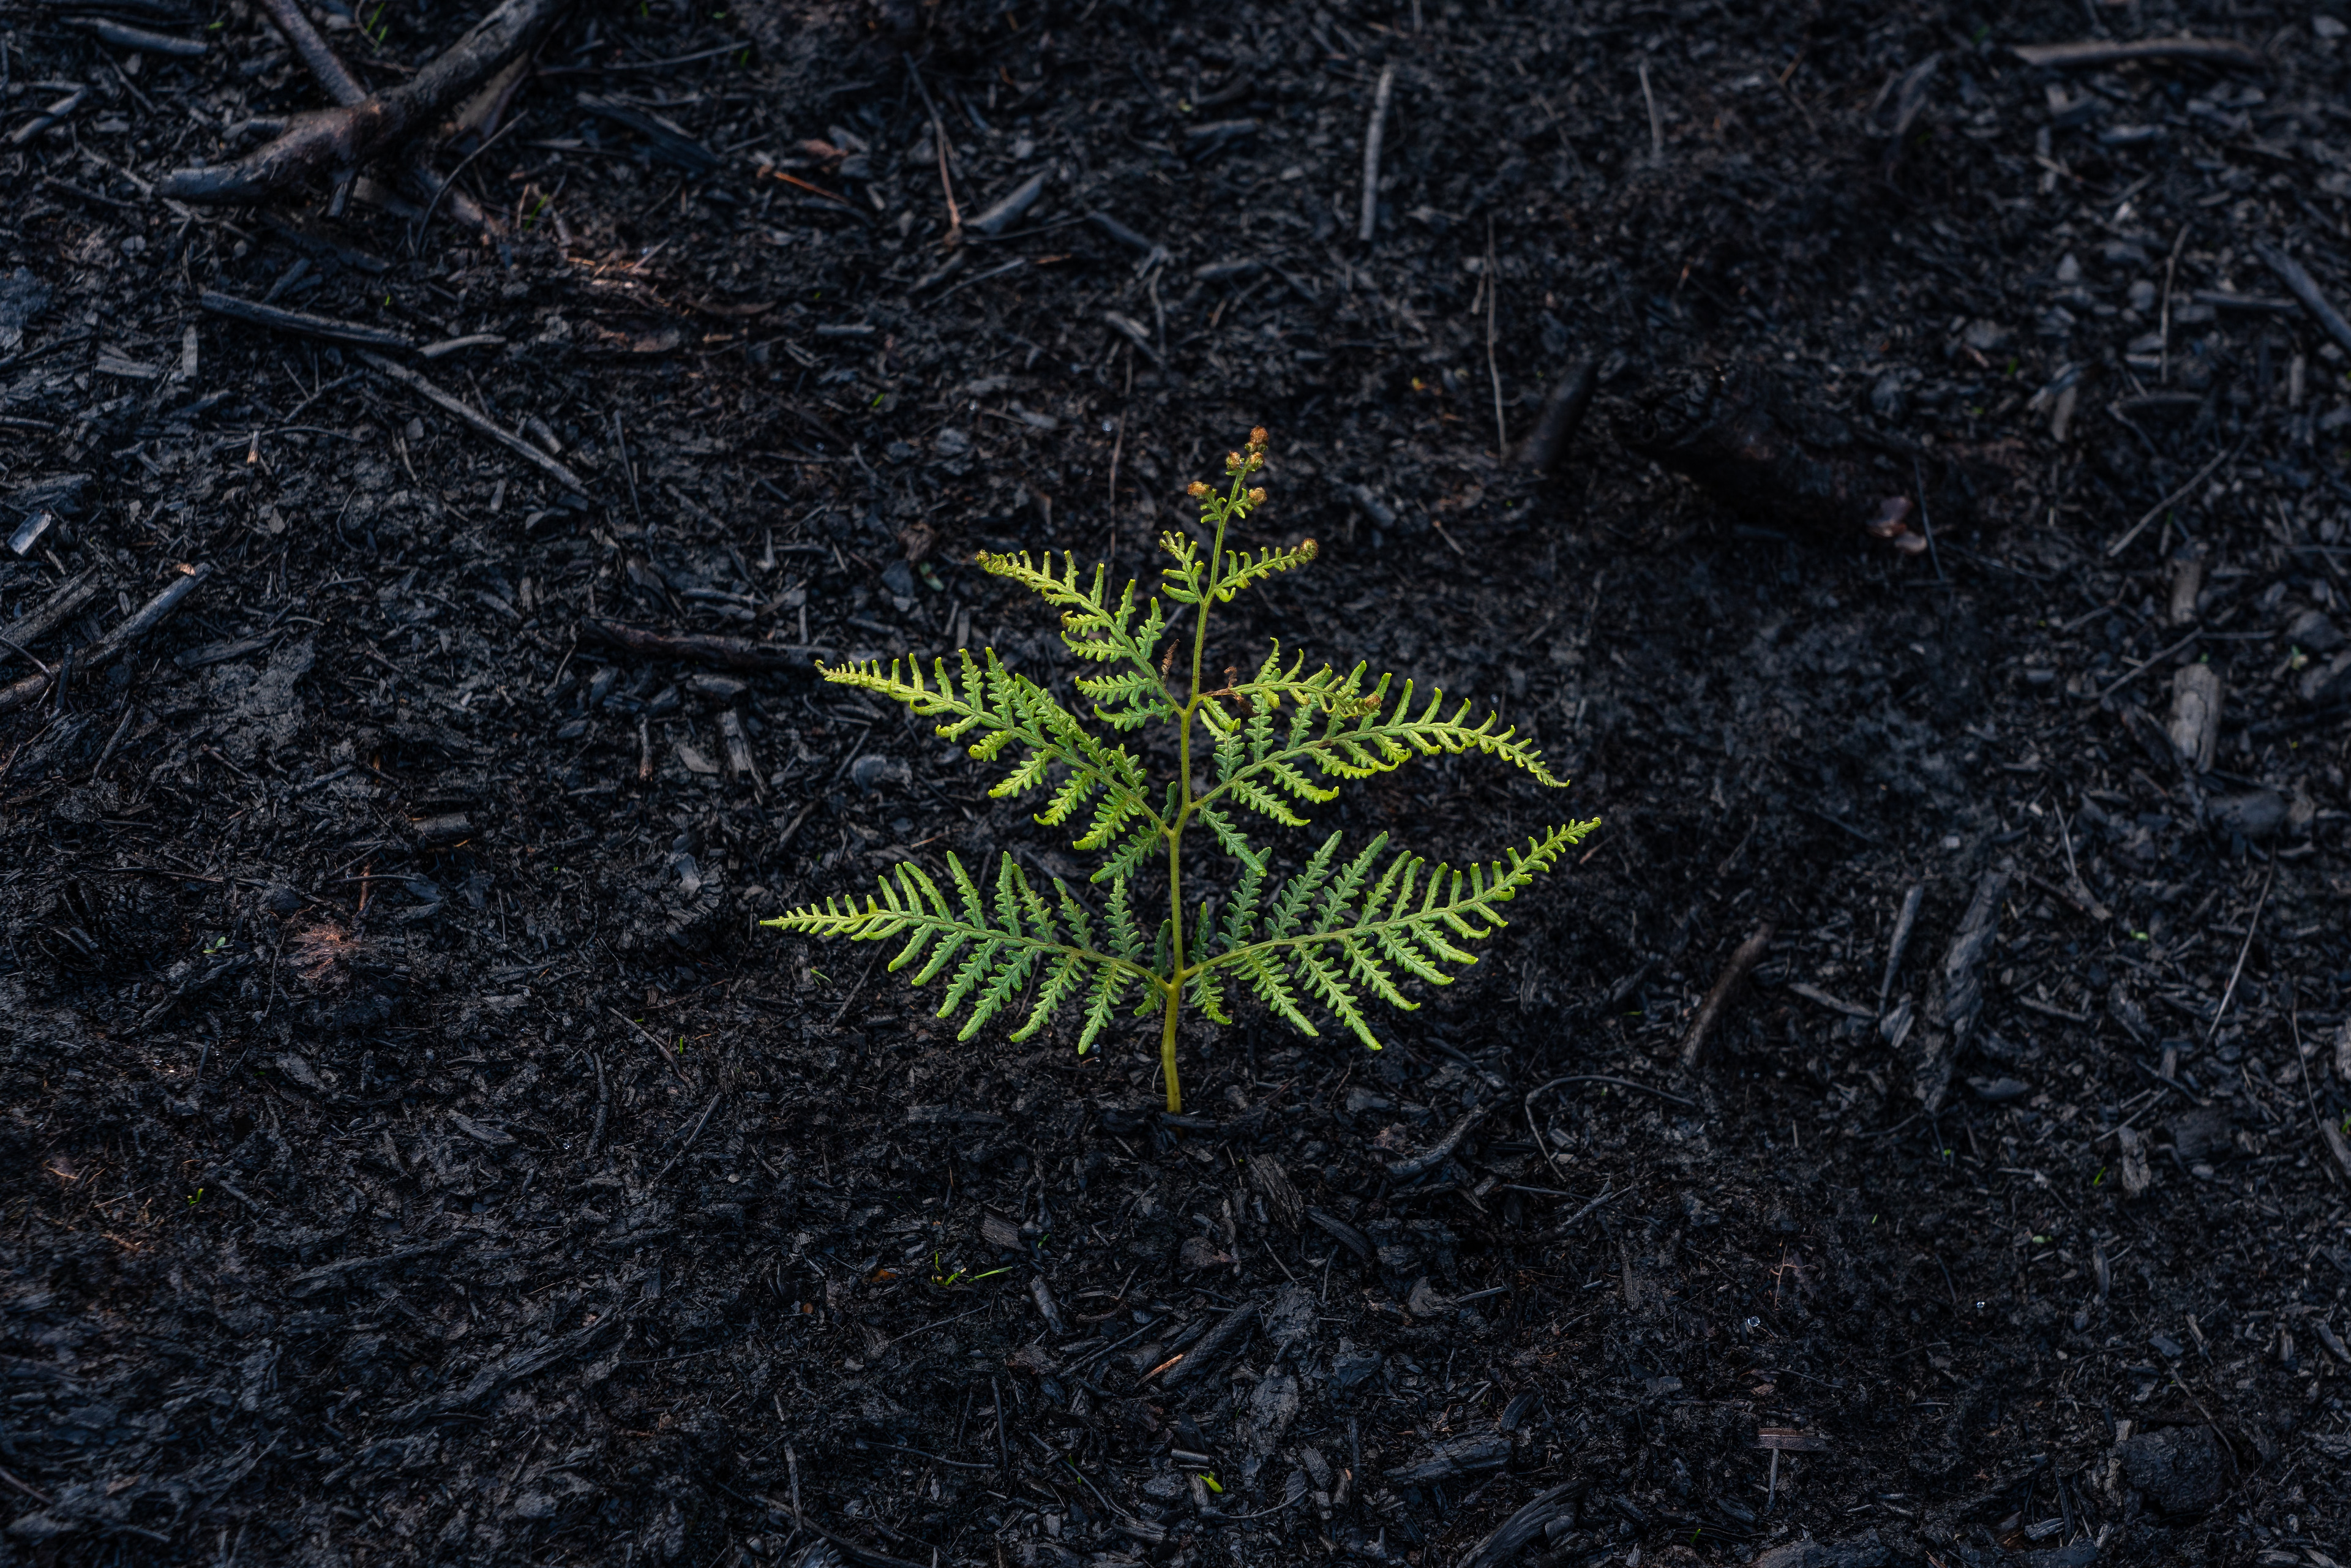 Photo of a fern growing in what looks like burnt ground.